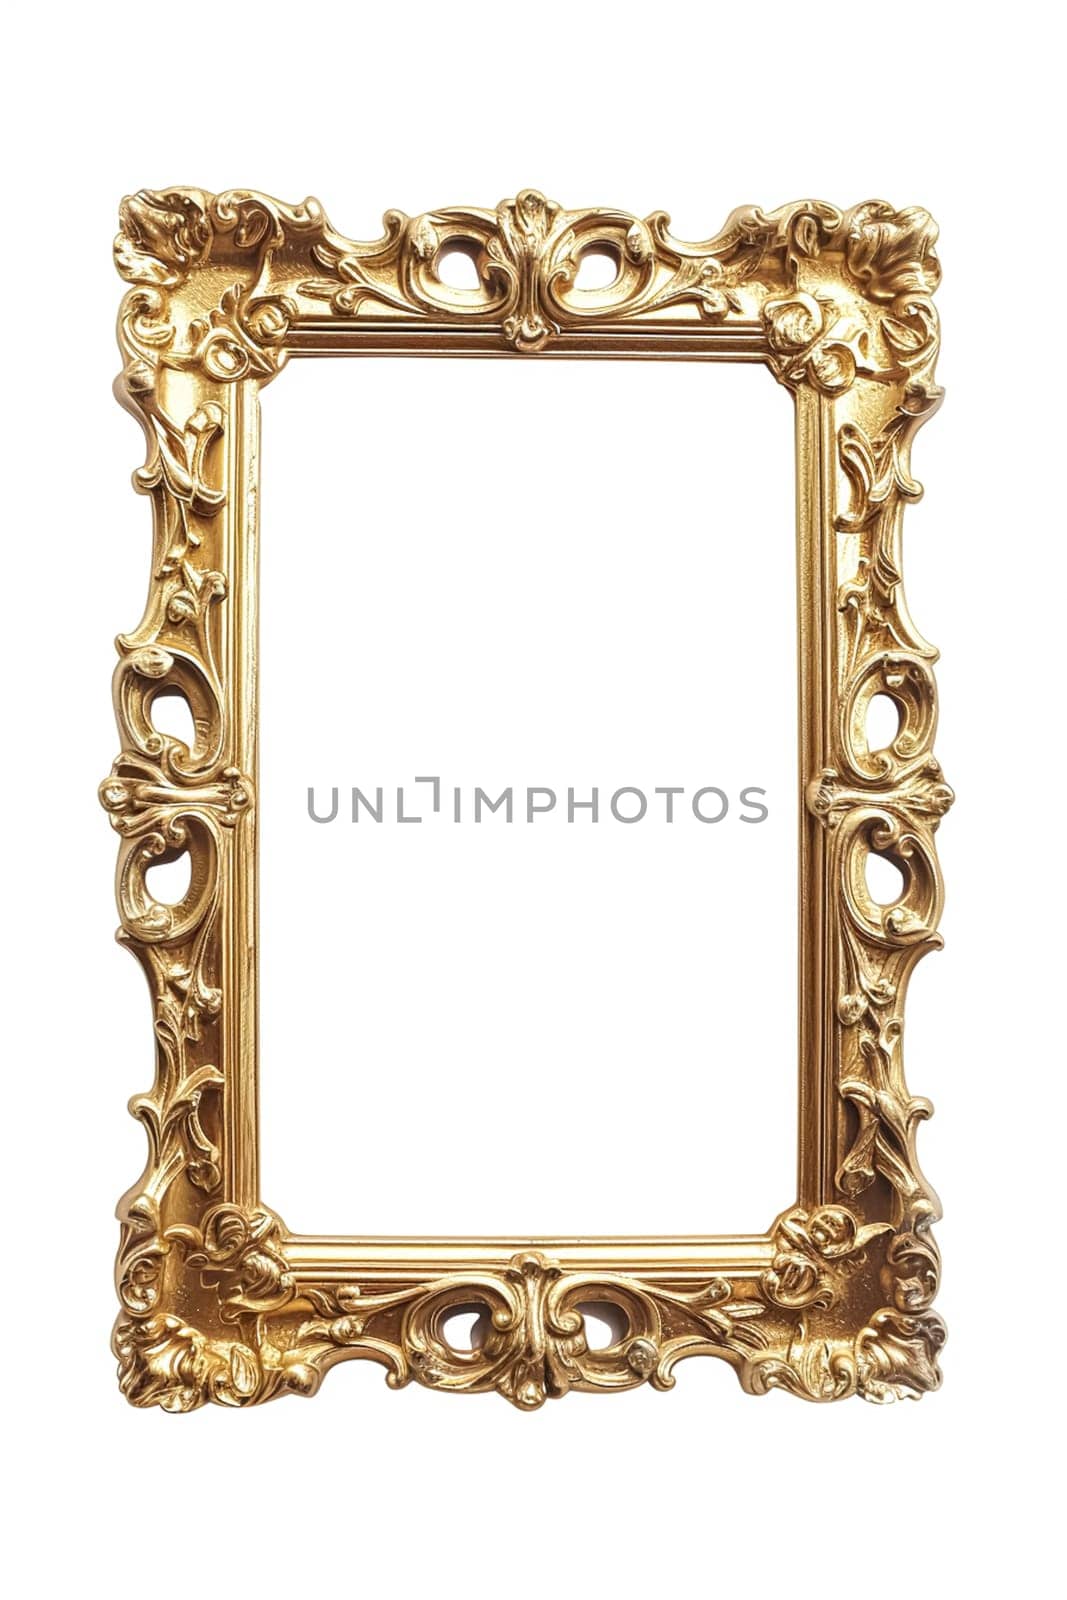 Blank empty 2:3 golden picture frame isolated on white background